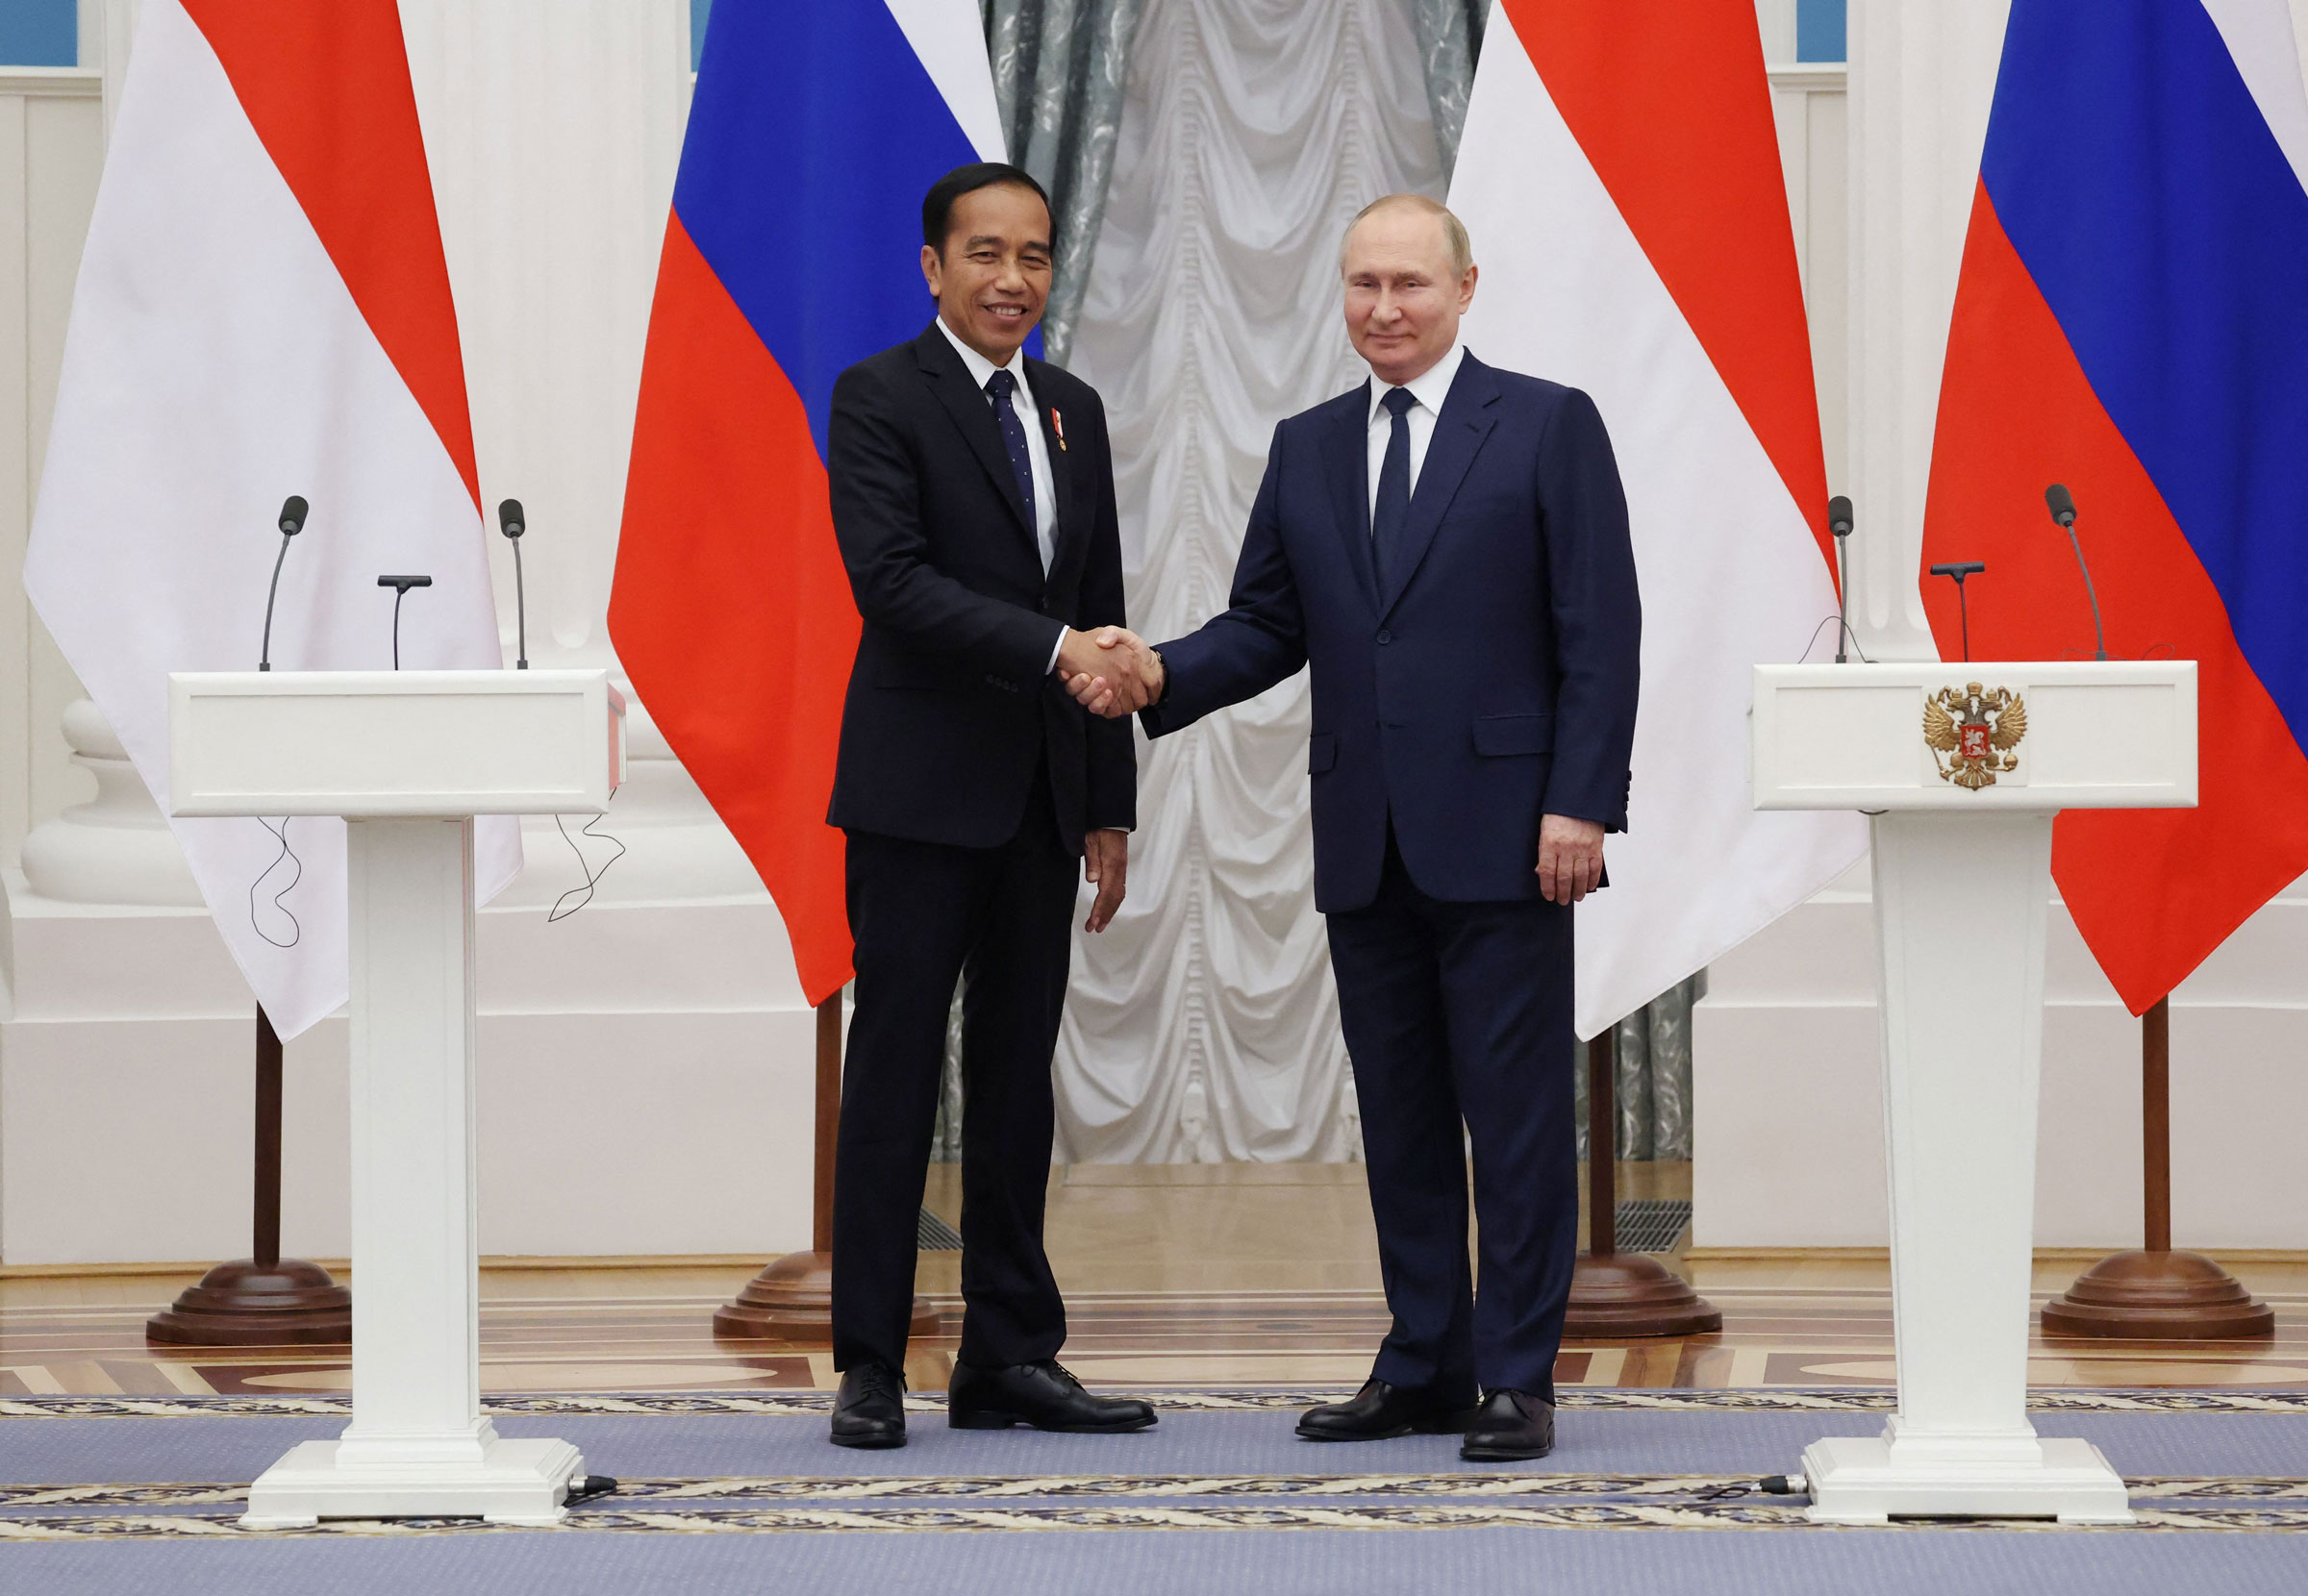 Russian President Vladimir Putin shake hands with Indonesia’s President Joko Widodo after a press conference at the Kremlin in Moscow, on June 30, 2022.